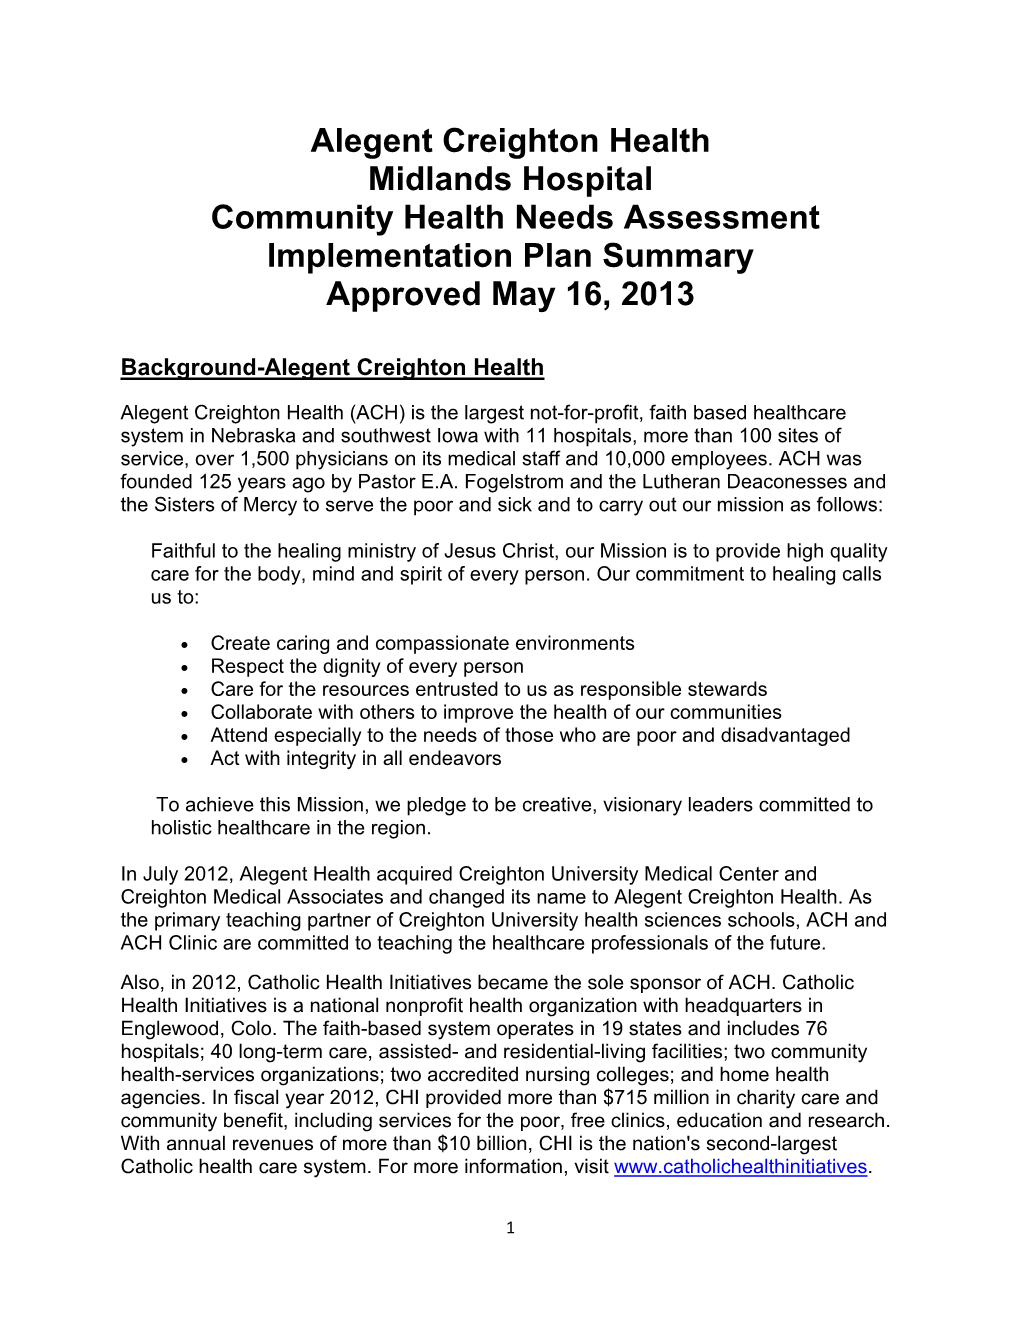 Alegent Creighton Health Midlands Hospital Community Health Needs Assessment Implementation Plan Summary Approved May 16, 2013